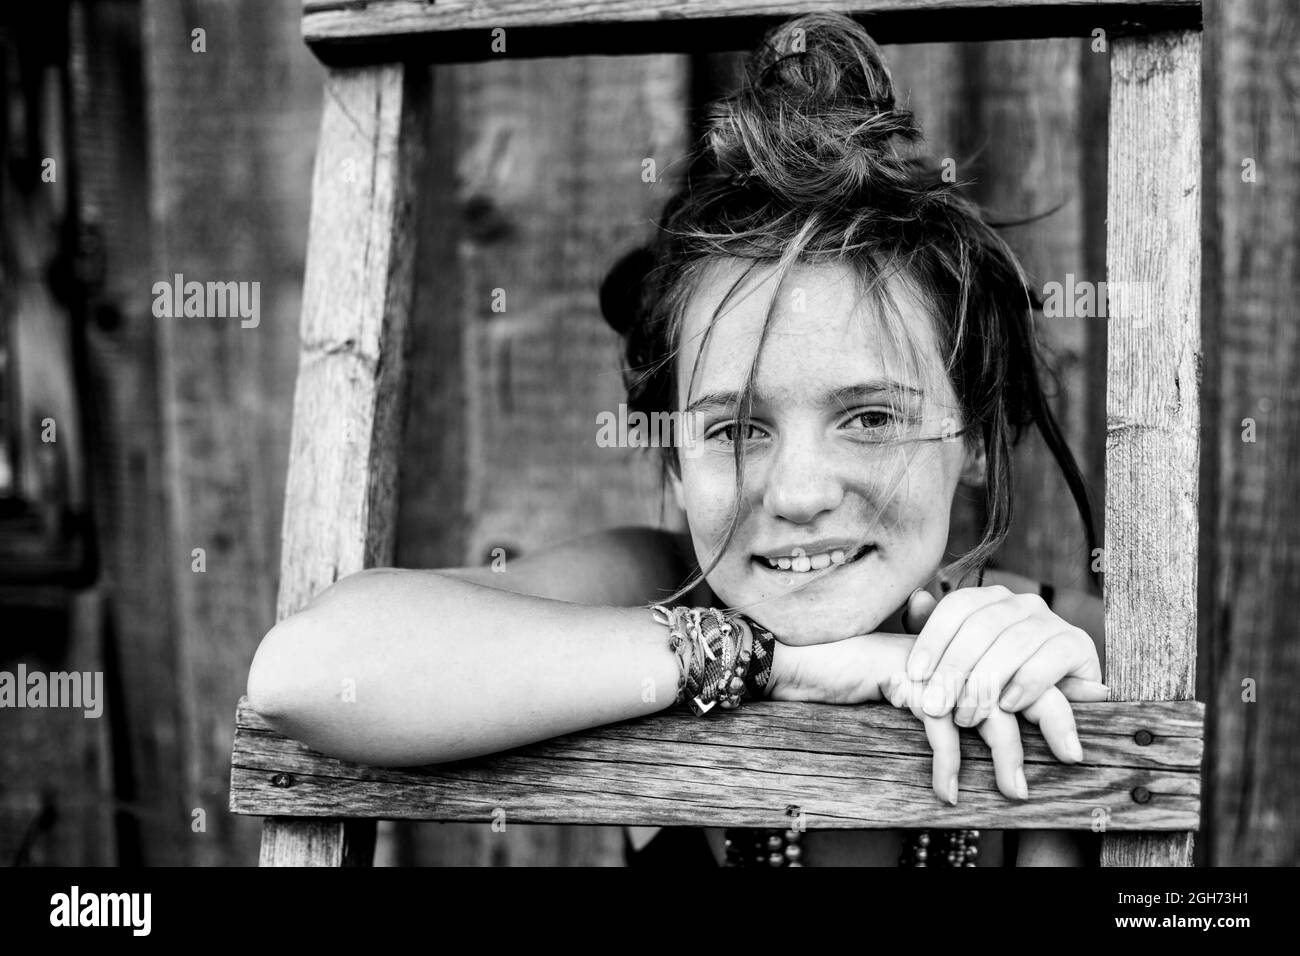 Girl portrait with hippie jewelry in rural surroundings. Black and white photo. Stock Photo